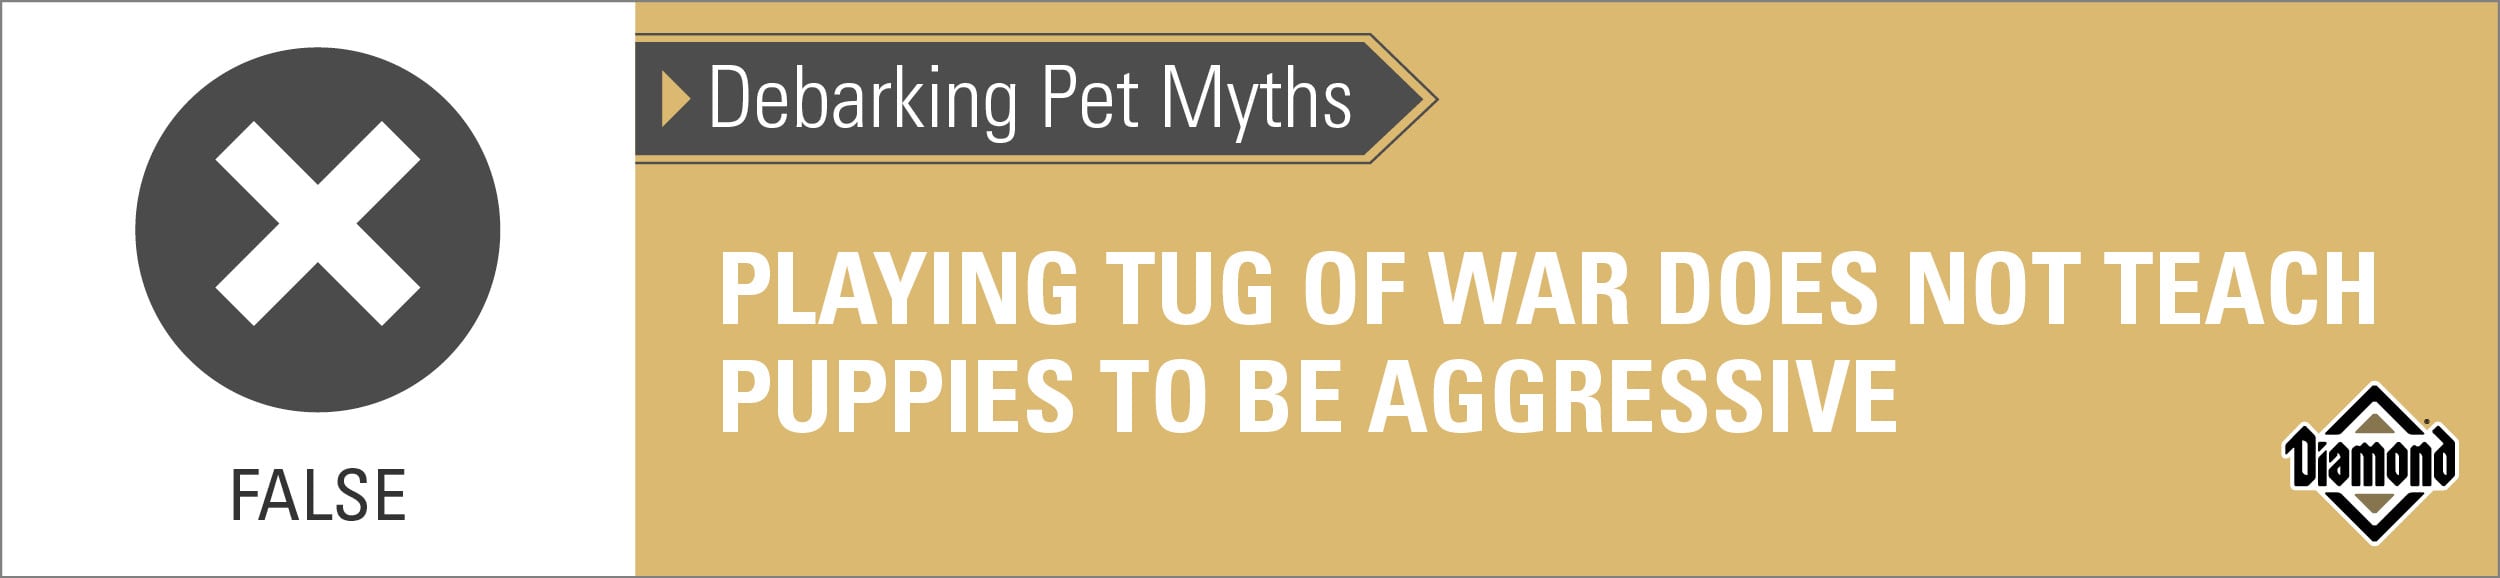 False: Playing Tug of War Properly Does Not Teach Puppies to Be Aggressive | Diamond Pet Foods